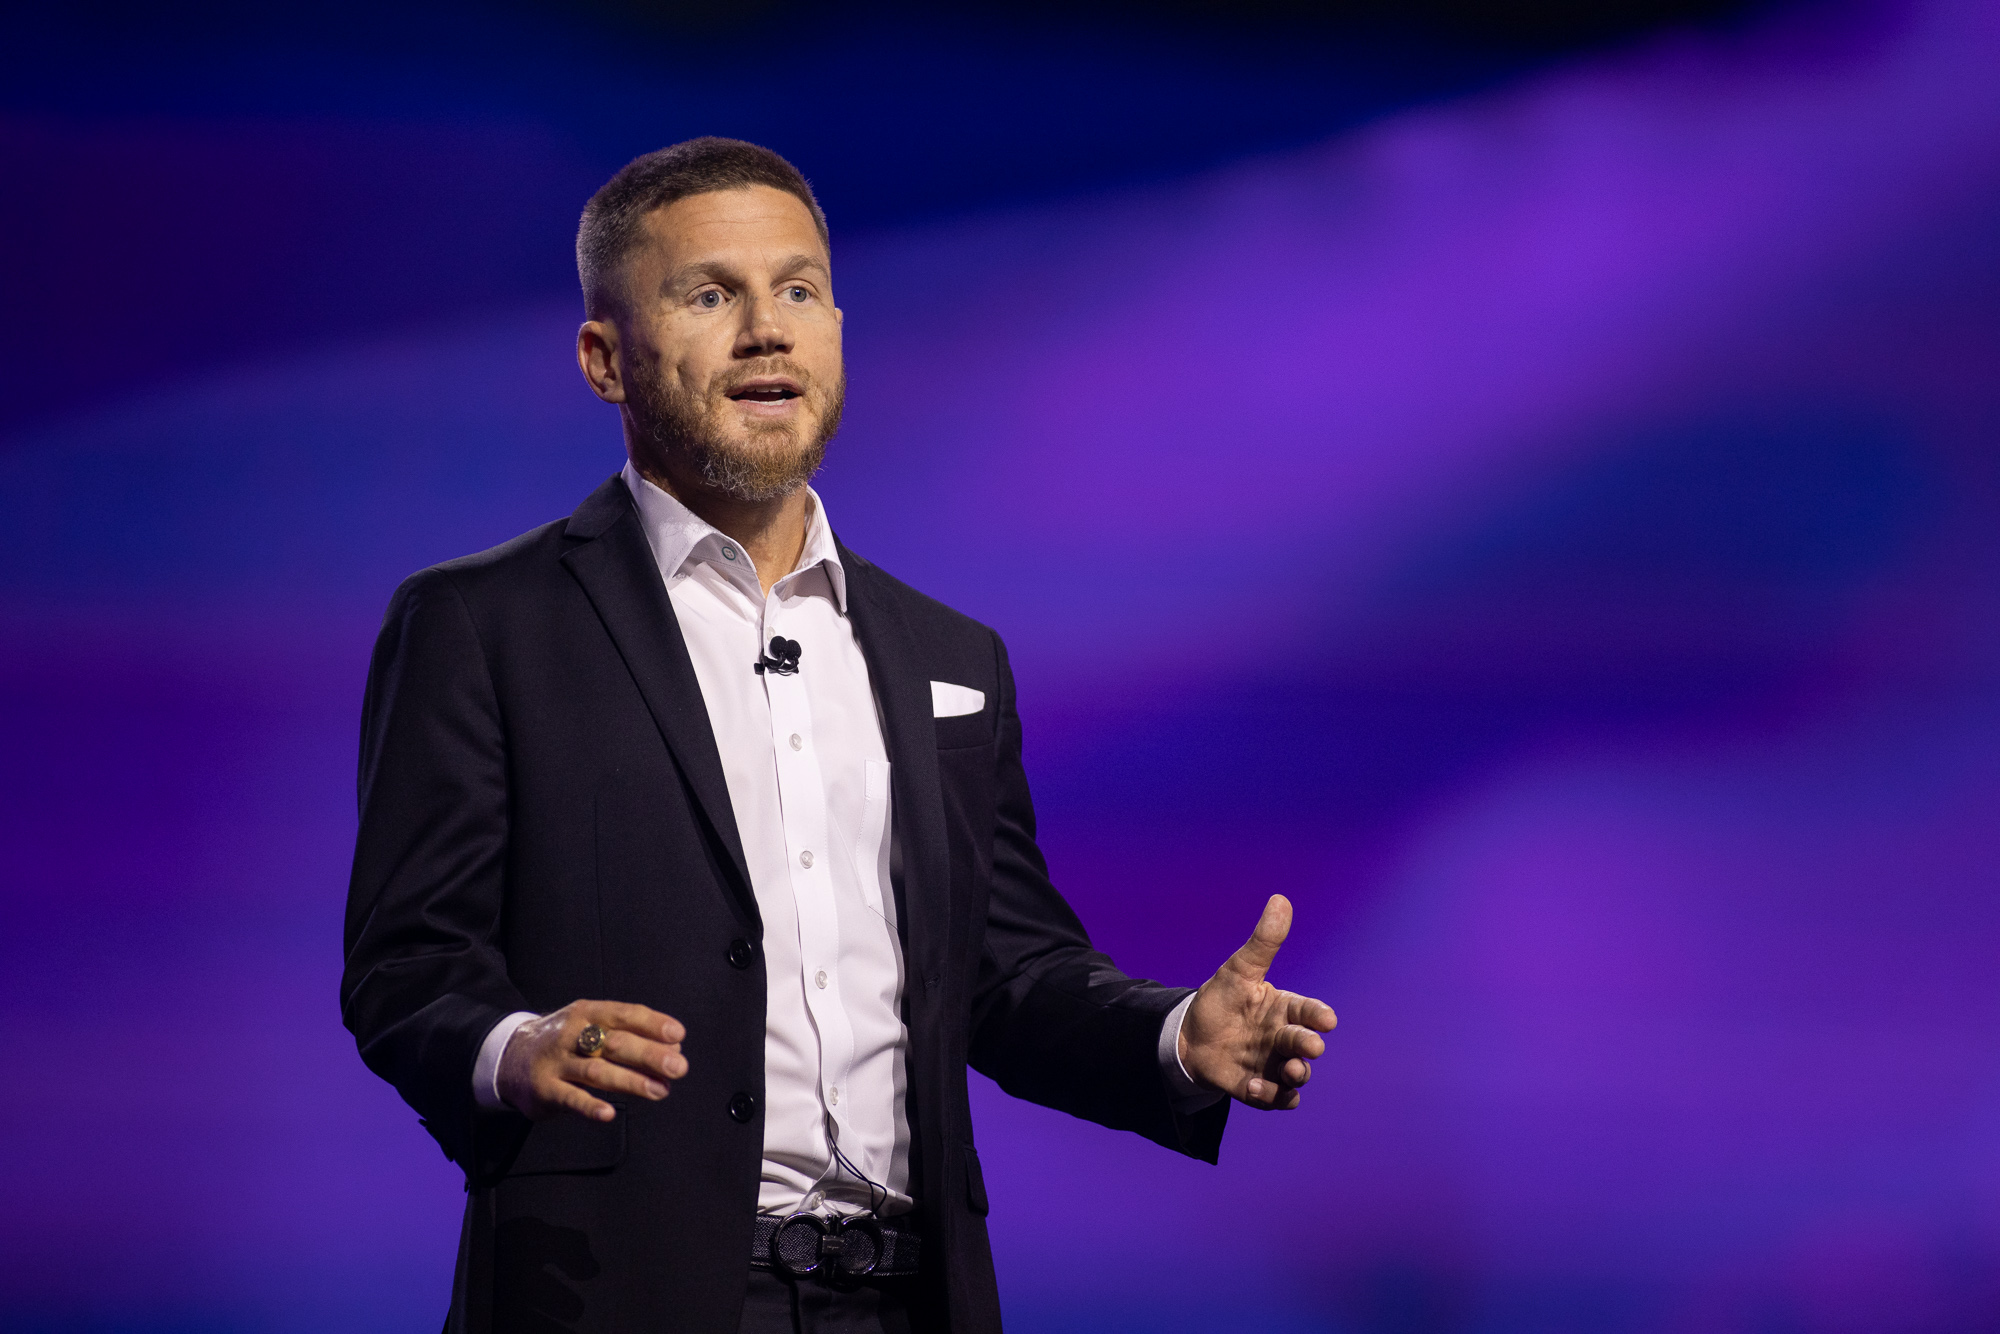 kyle carpenter on stage at apartmentalize